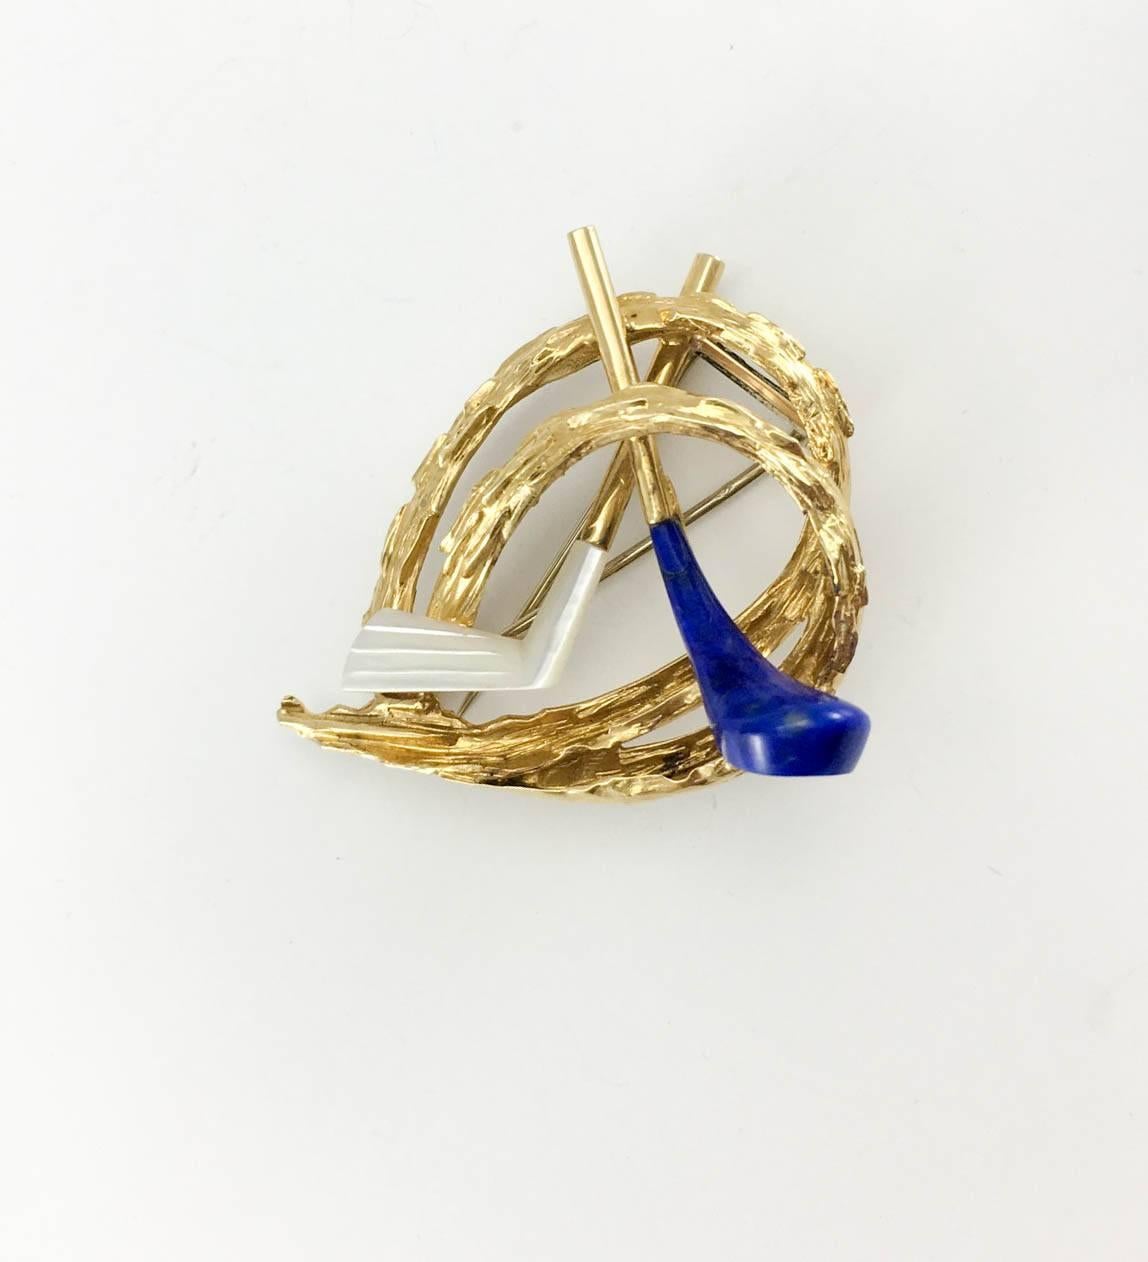 Chaumet 18K Gold, Lapis Lazuli and Mother of Pearl Golfing Brooch - 1960s In Excellent Condition In London, Chelsea